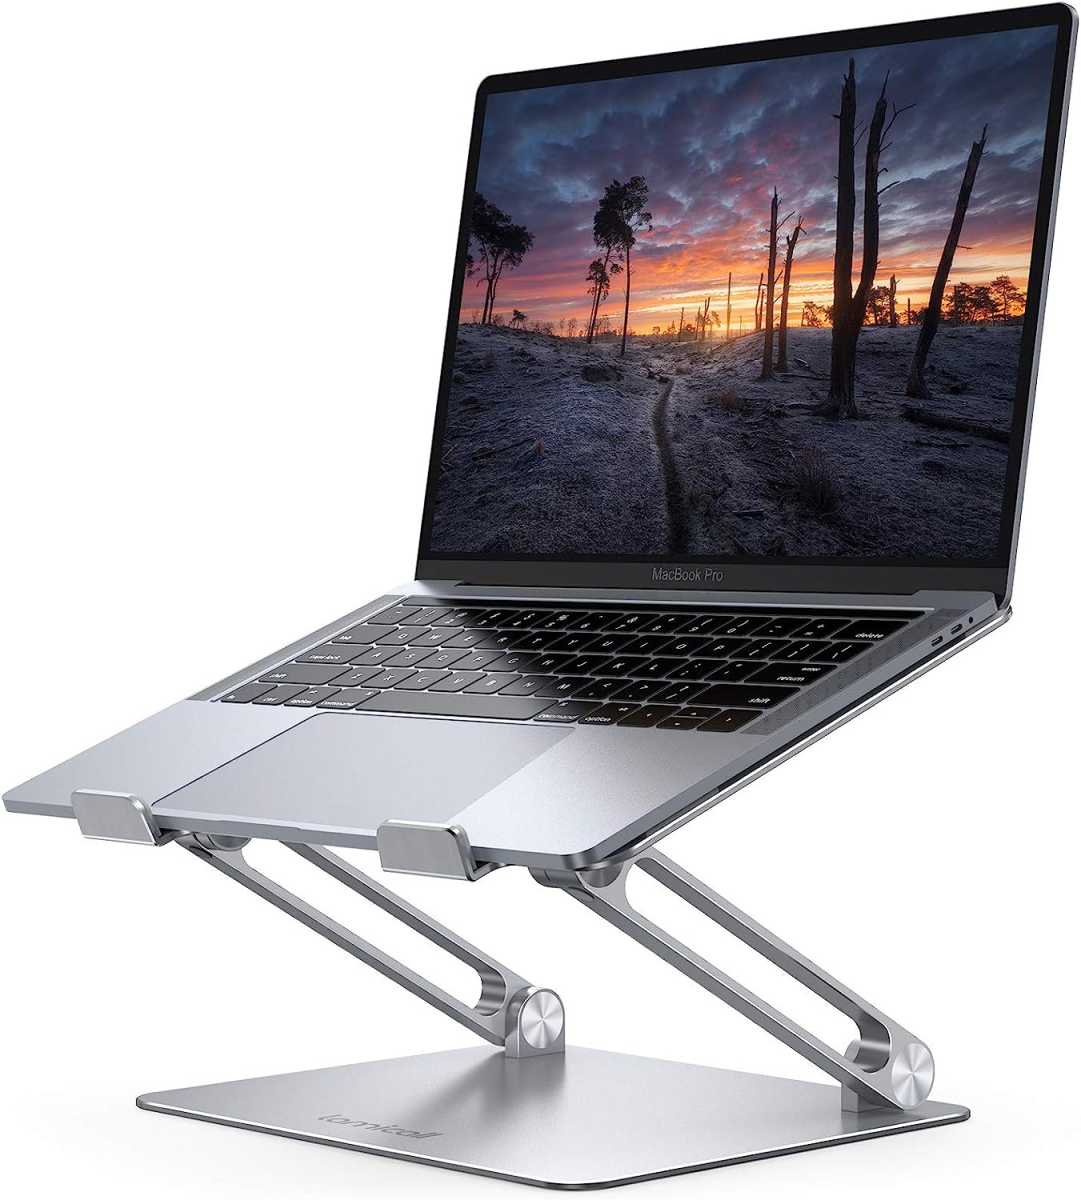 Lamicall laptop stand